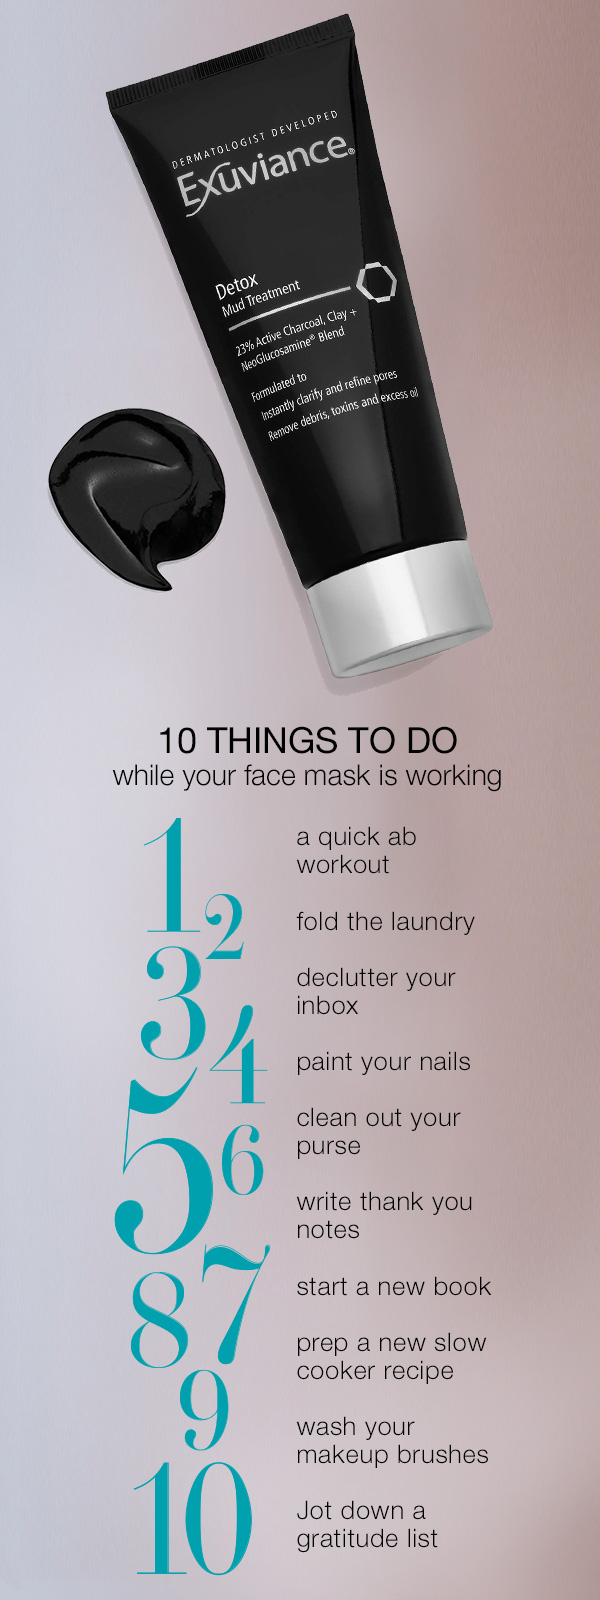 10 Things To Do While Your Face Mask Is Working